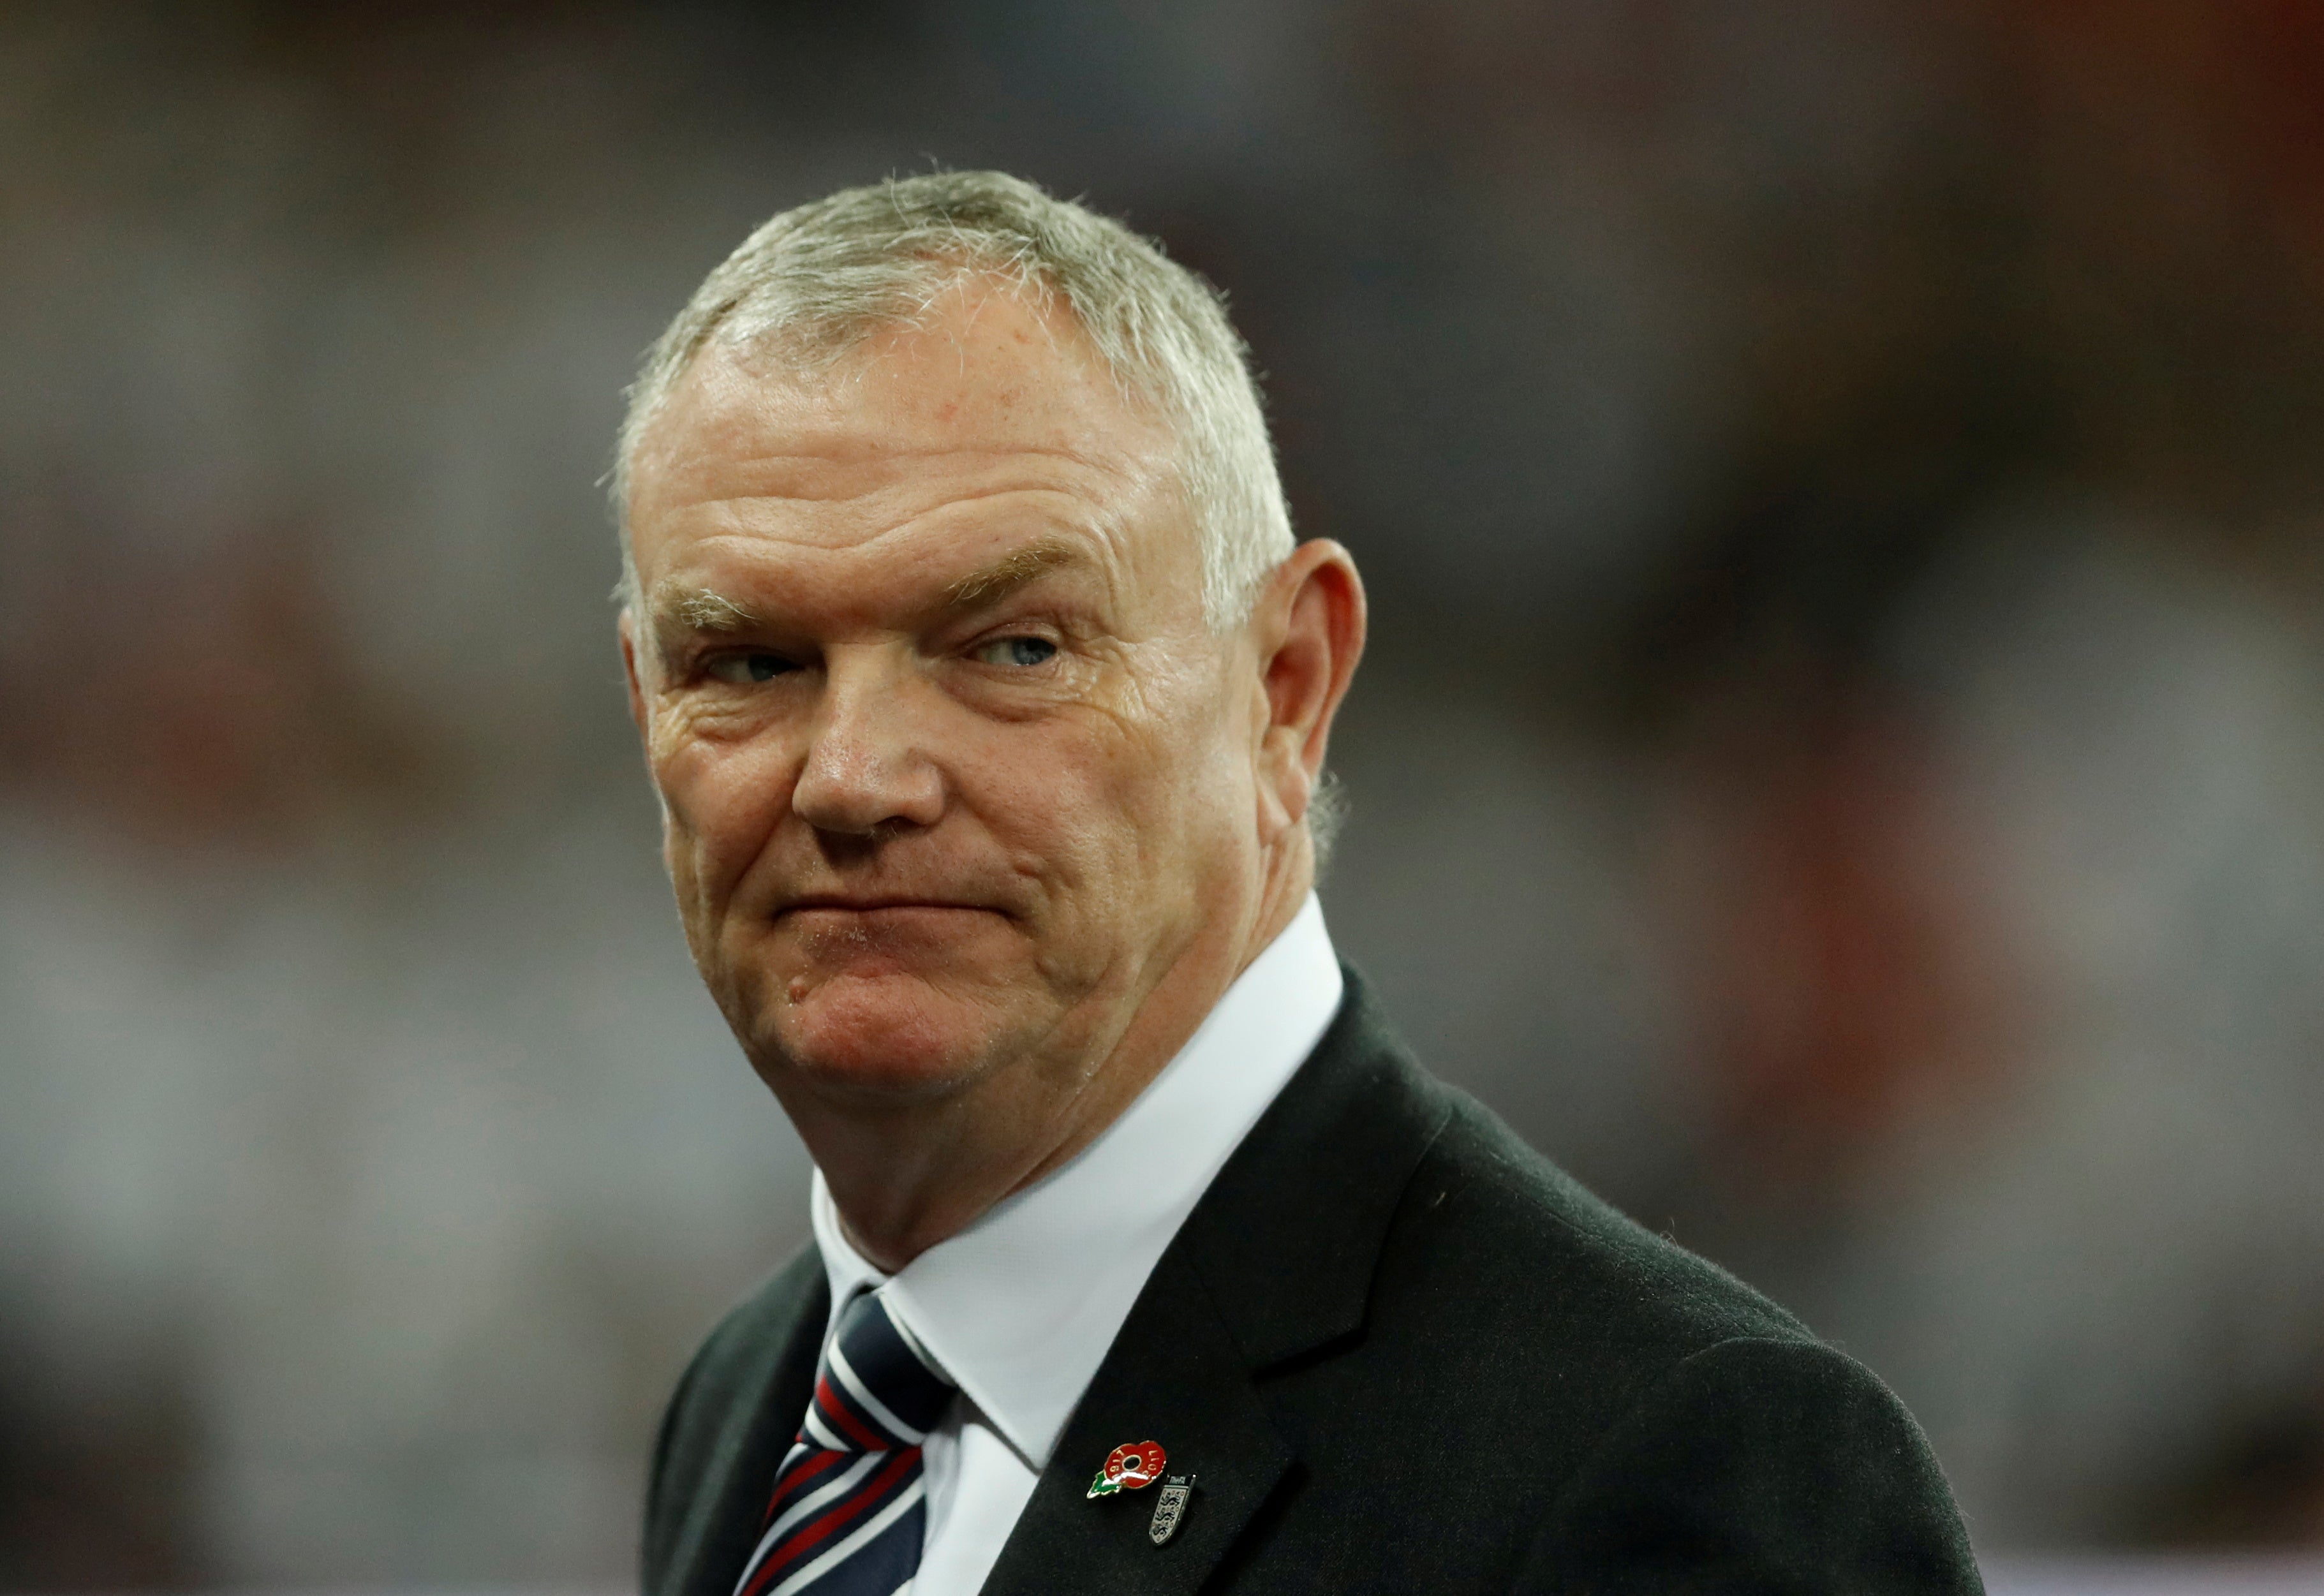 FA chairman Greg Clarke apologised for using the term ‘coloured’ during a DCMS Select Committee hearing